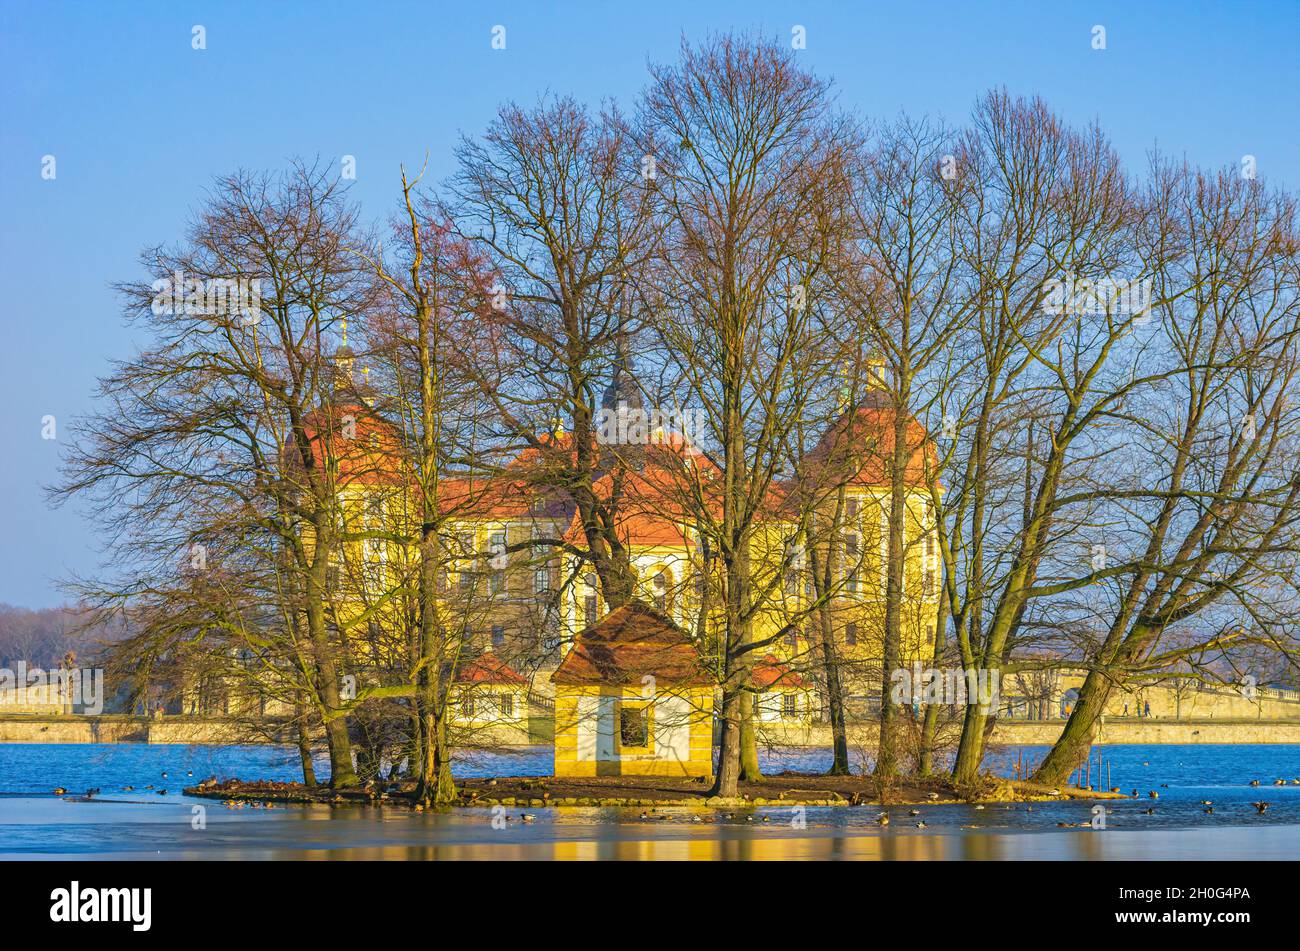 Moritzburg near Dresden, Saxony, Germany: Wintry Moritzburg Palace behind the group of trees of a duck islet set in the half-frozen palace pond. Stock Photo